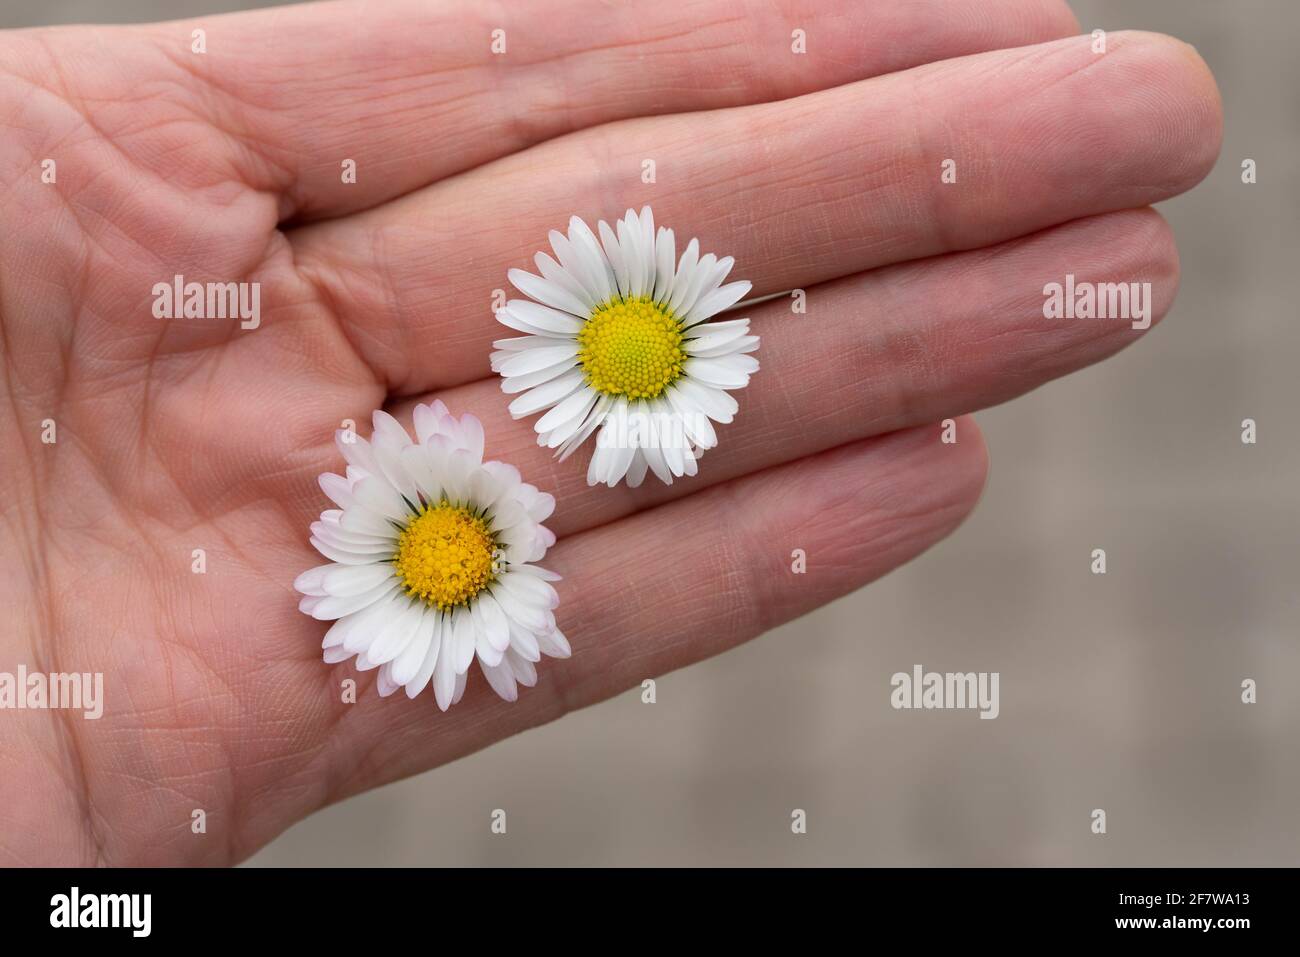 Close up of an elderly woman's hand outstretched and holding two fresh daisies Stock Photo